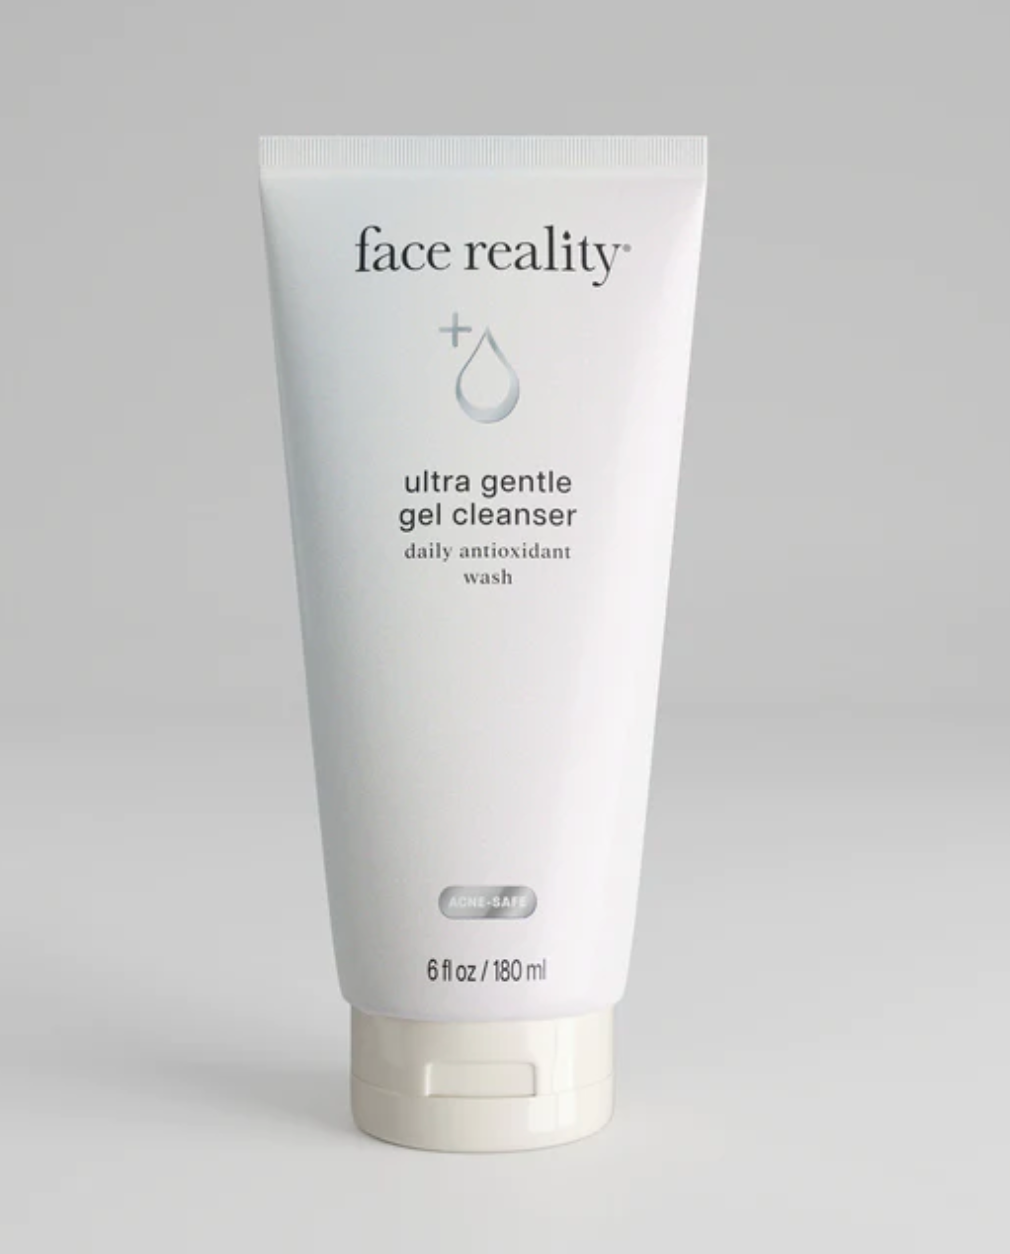 ultra gentle cleanser - acne safe antioxidant wash face reality los angeles acne clinic 